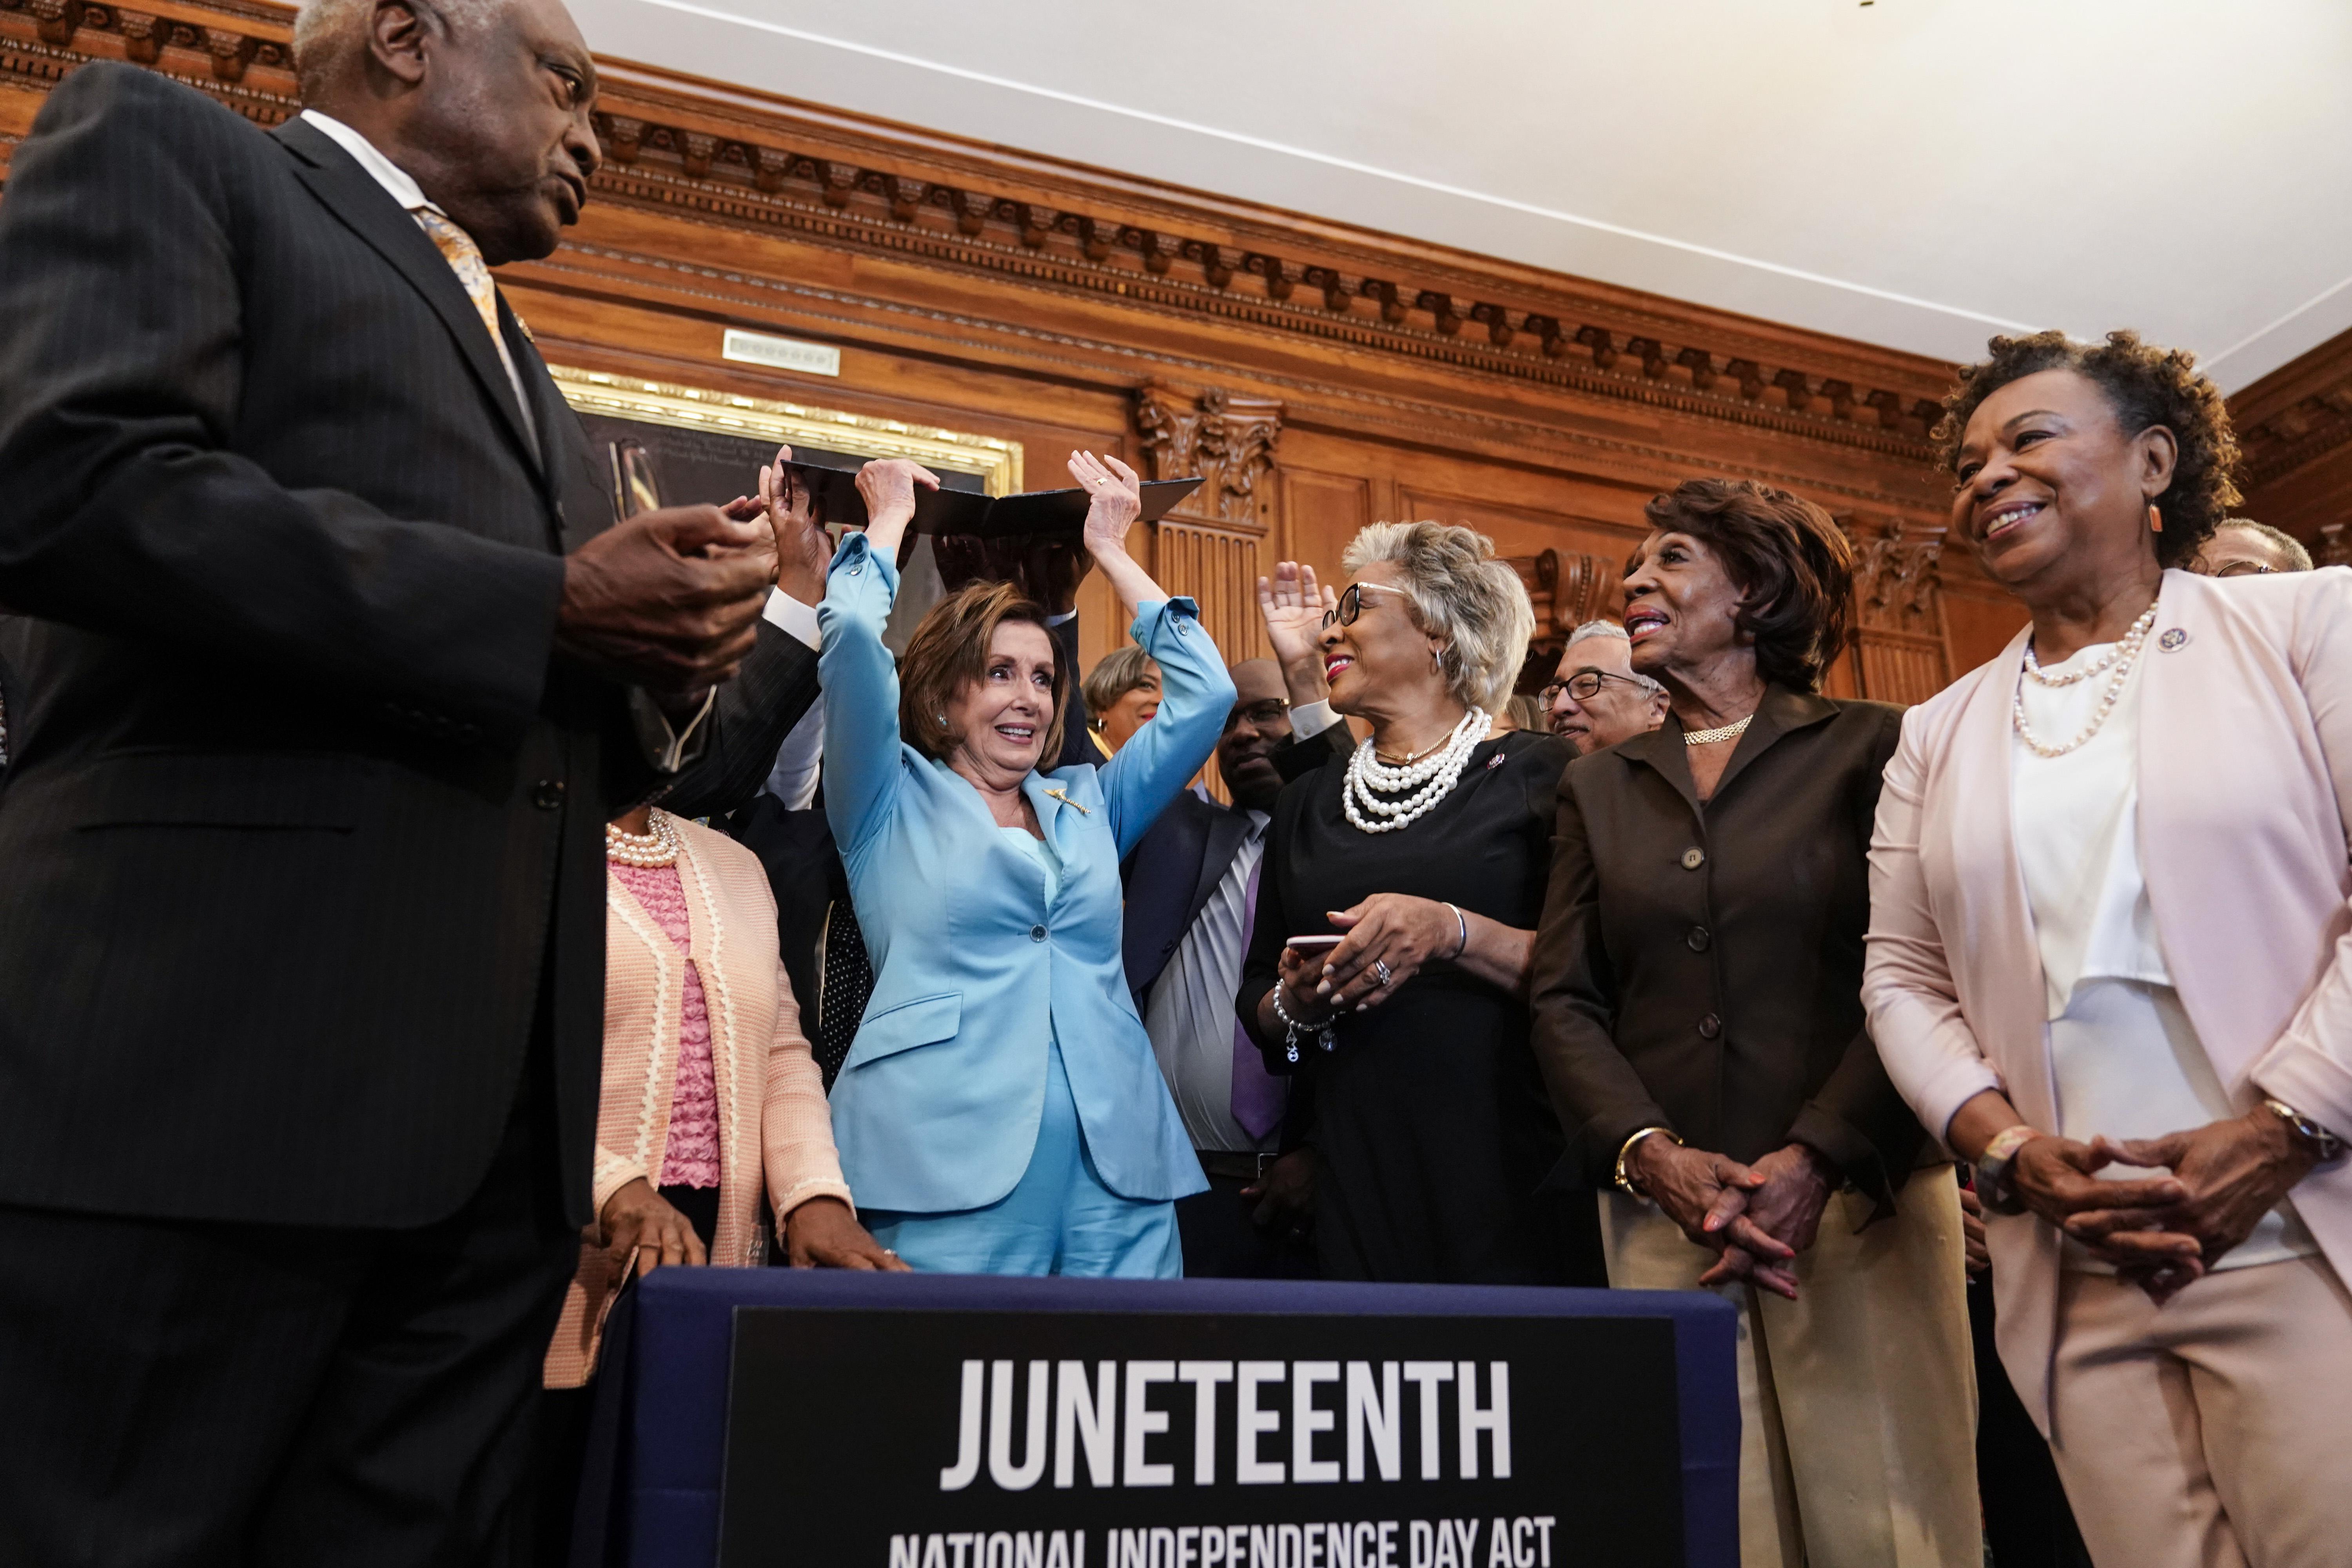 WASHINGTON, DC - JUNE 17: Speaker of the House Nancy Pelosi (D-CA) holds a bill enrollment signing ceremony for the Juneteenth National Independence Day Act as members of the Congressional Black Caucus hold the bill on June 17, 2021 on Capitol Hill in Washington, DC. Juneteenth, celebrated on June 19th,  commemorates the of the end of slavery in the United States and will be celebrated as a national holiday. (Photo by Joshua Roberts/Getty Images)